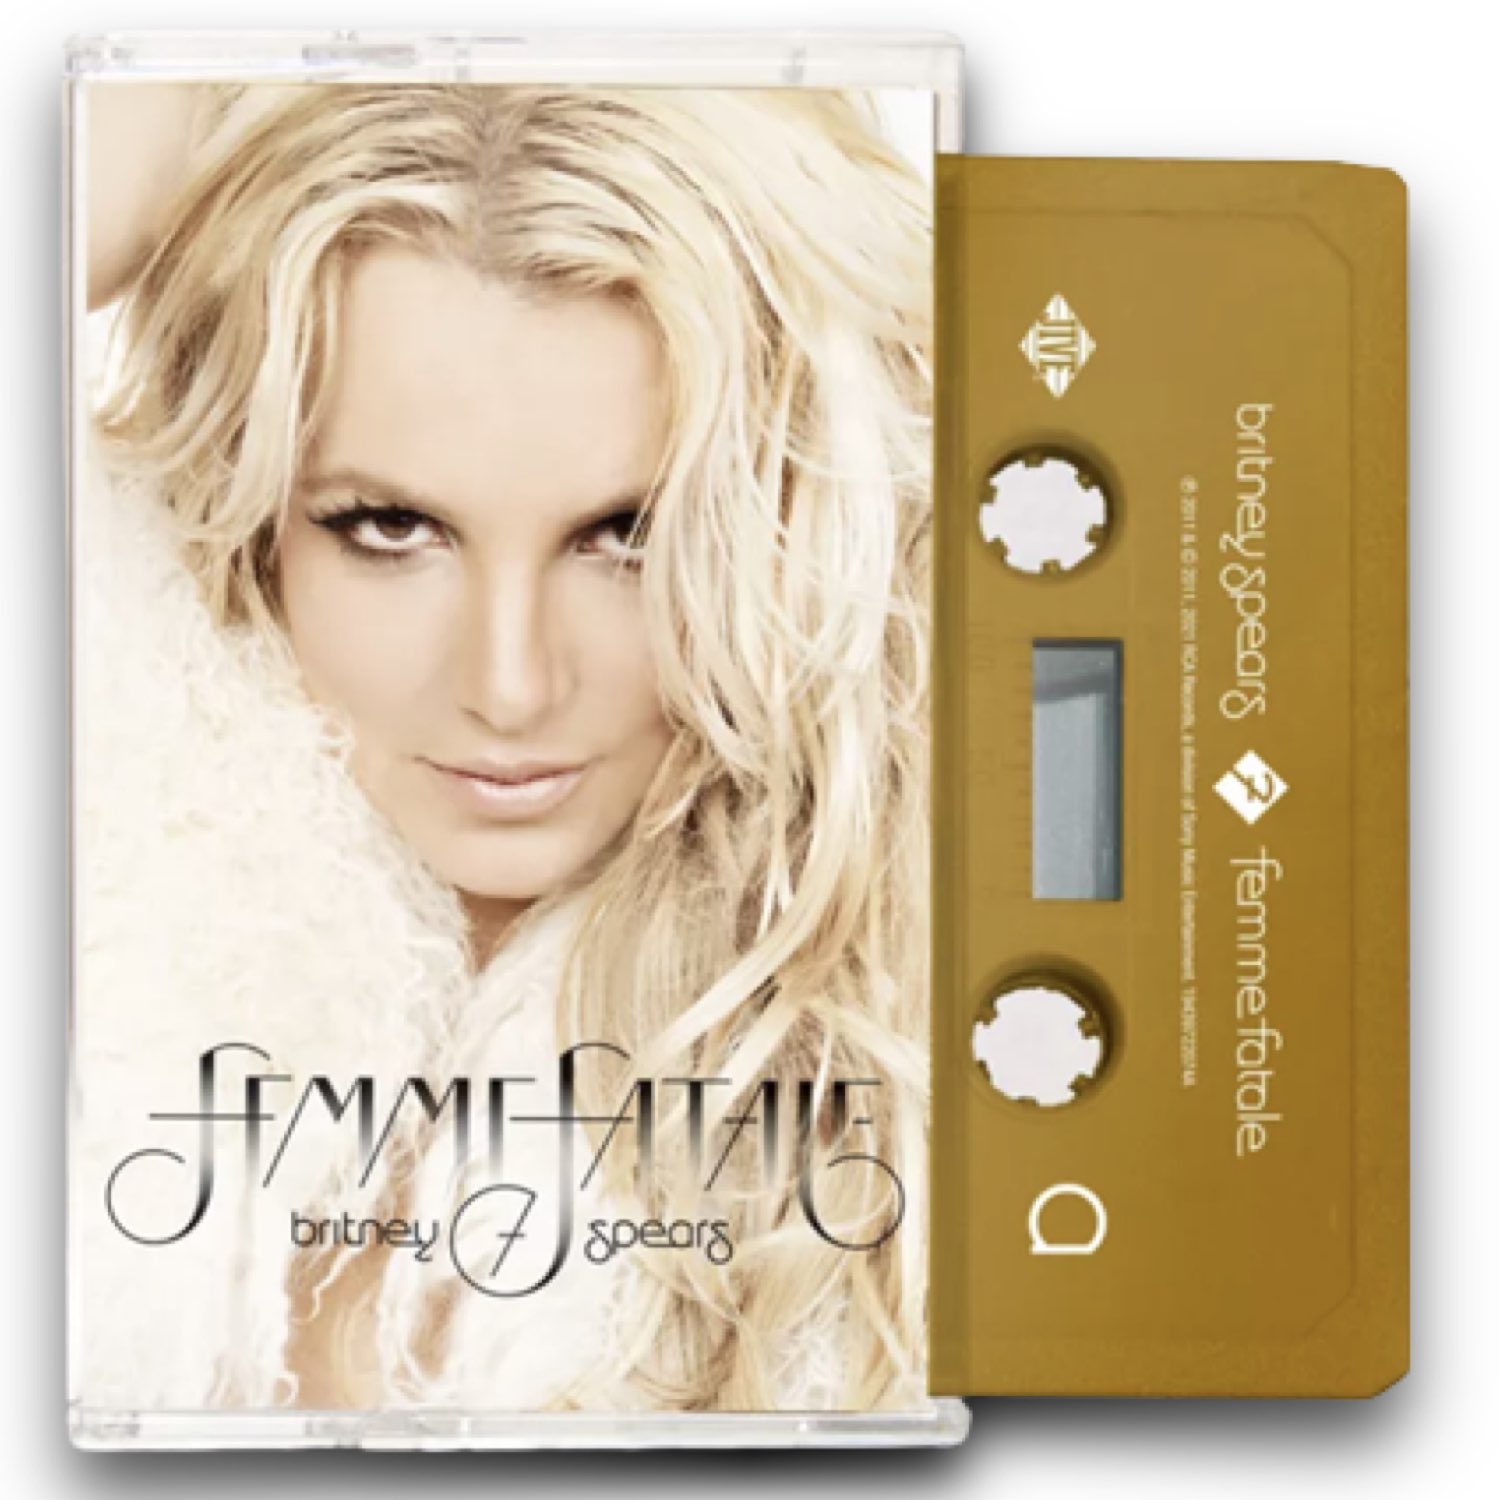 Britney Spears - Femme Fatale [Limited Edition - Gold Shell Cassette]